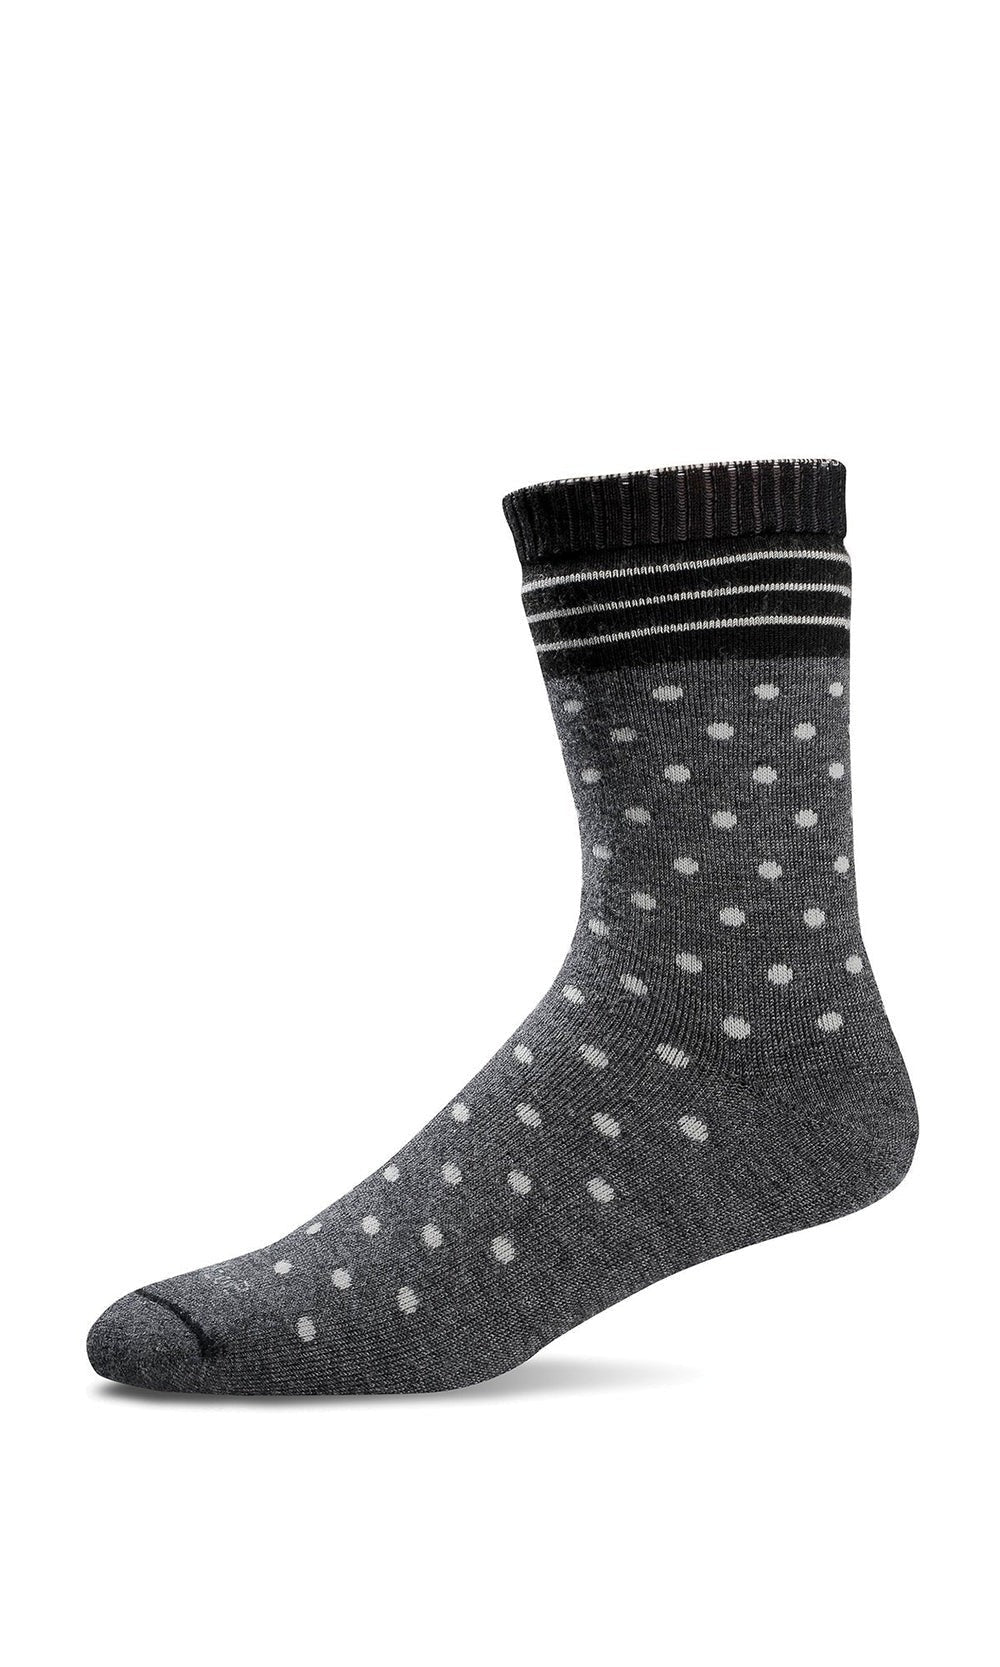 Plush | Relaxed Fit | Charcoal - Socks - Sockwell